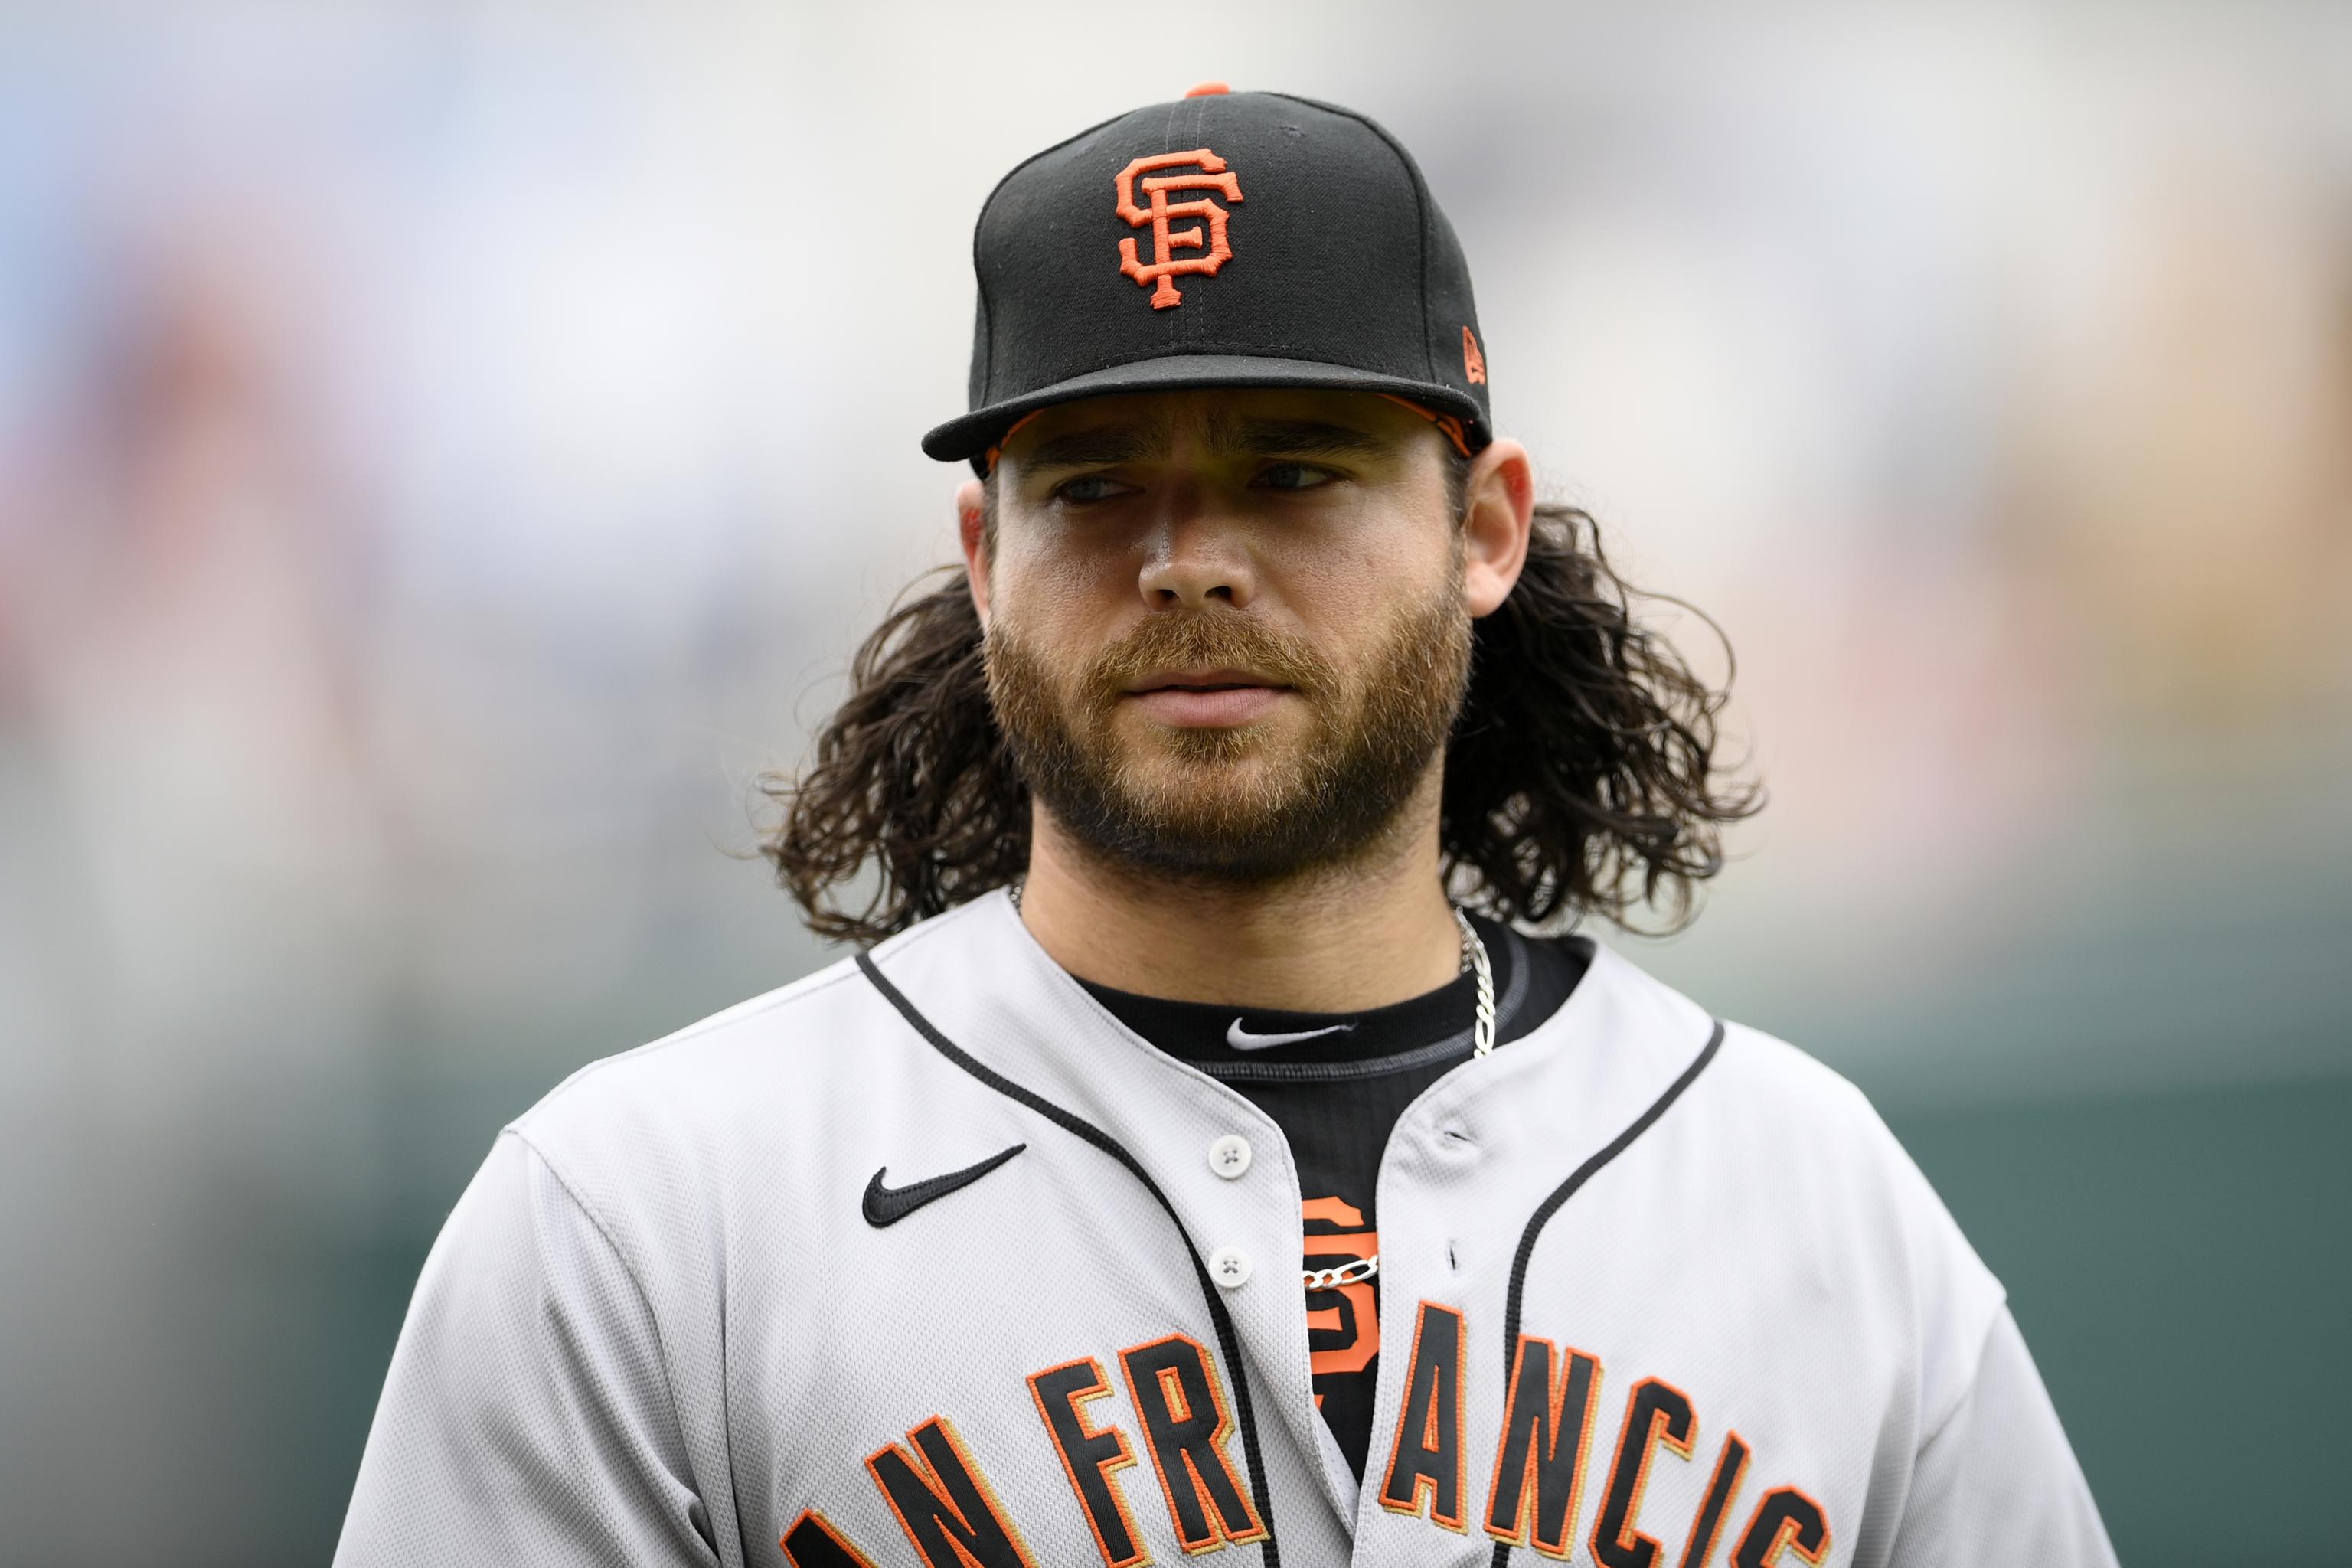 Giants' Brandon Crawford deserves an ovation fit for an all-time great